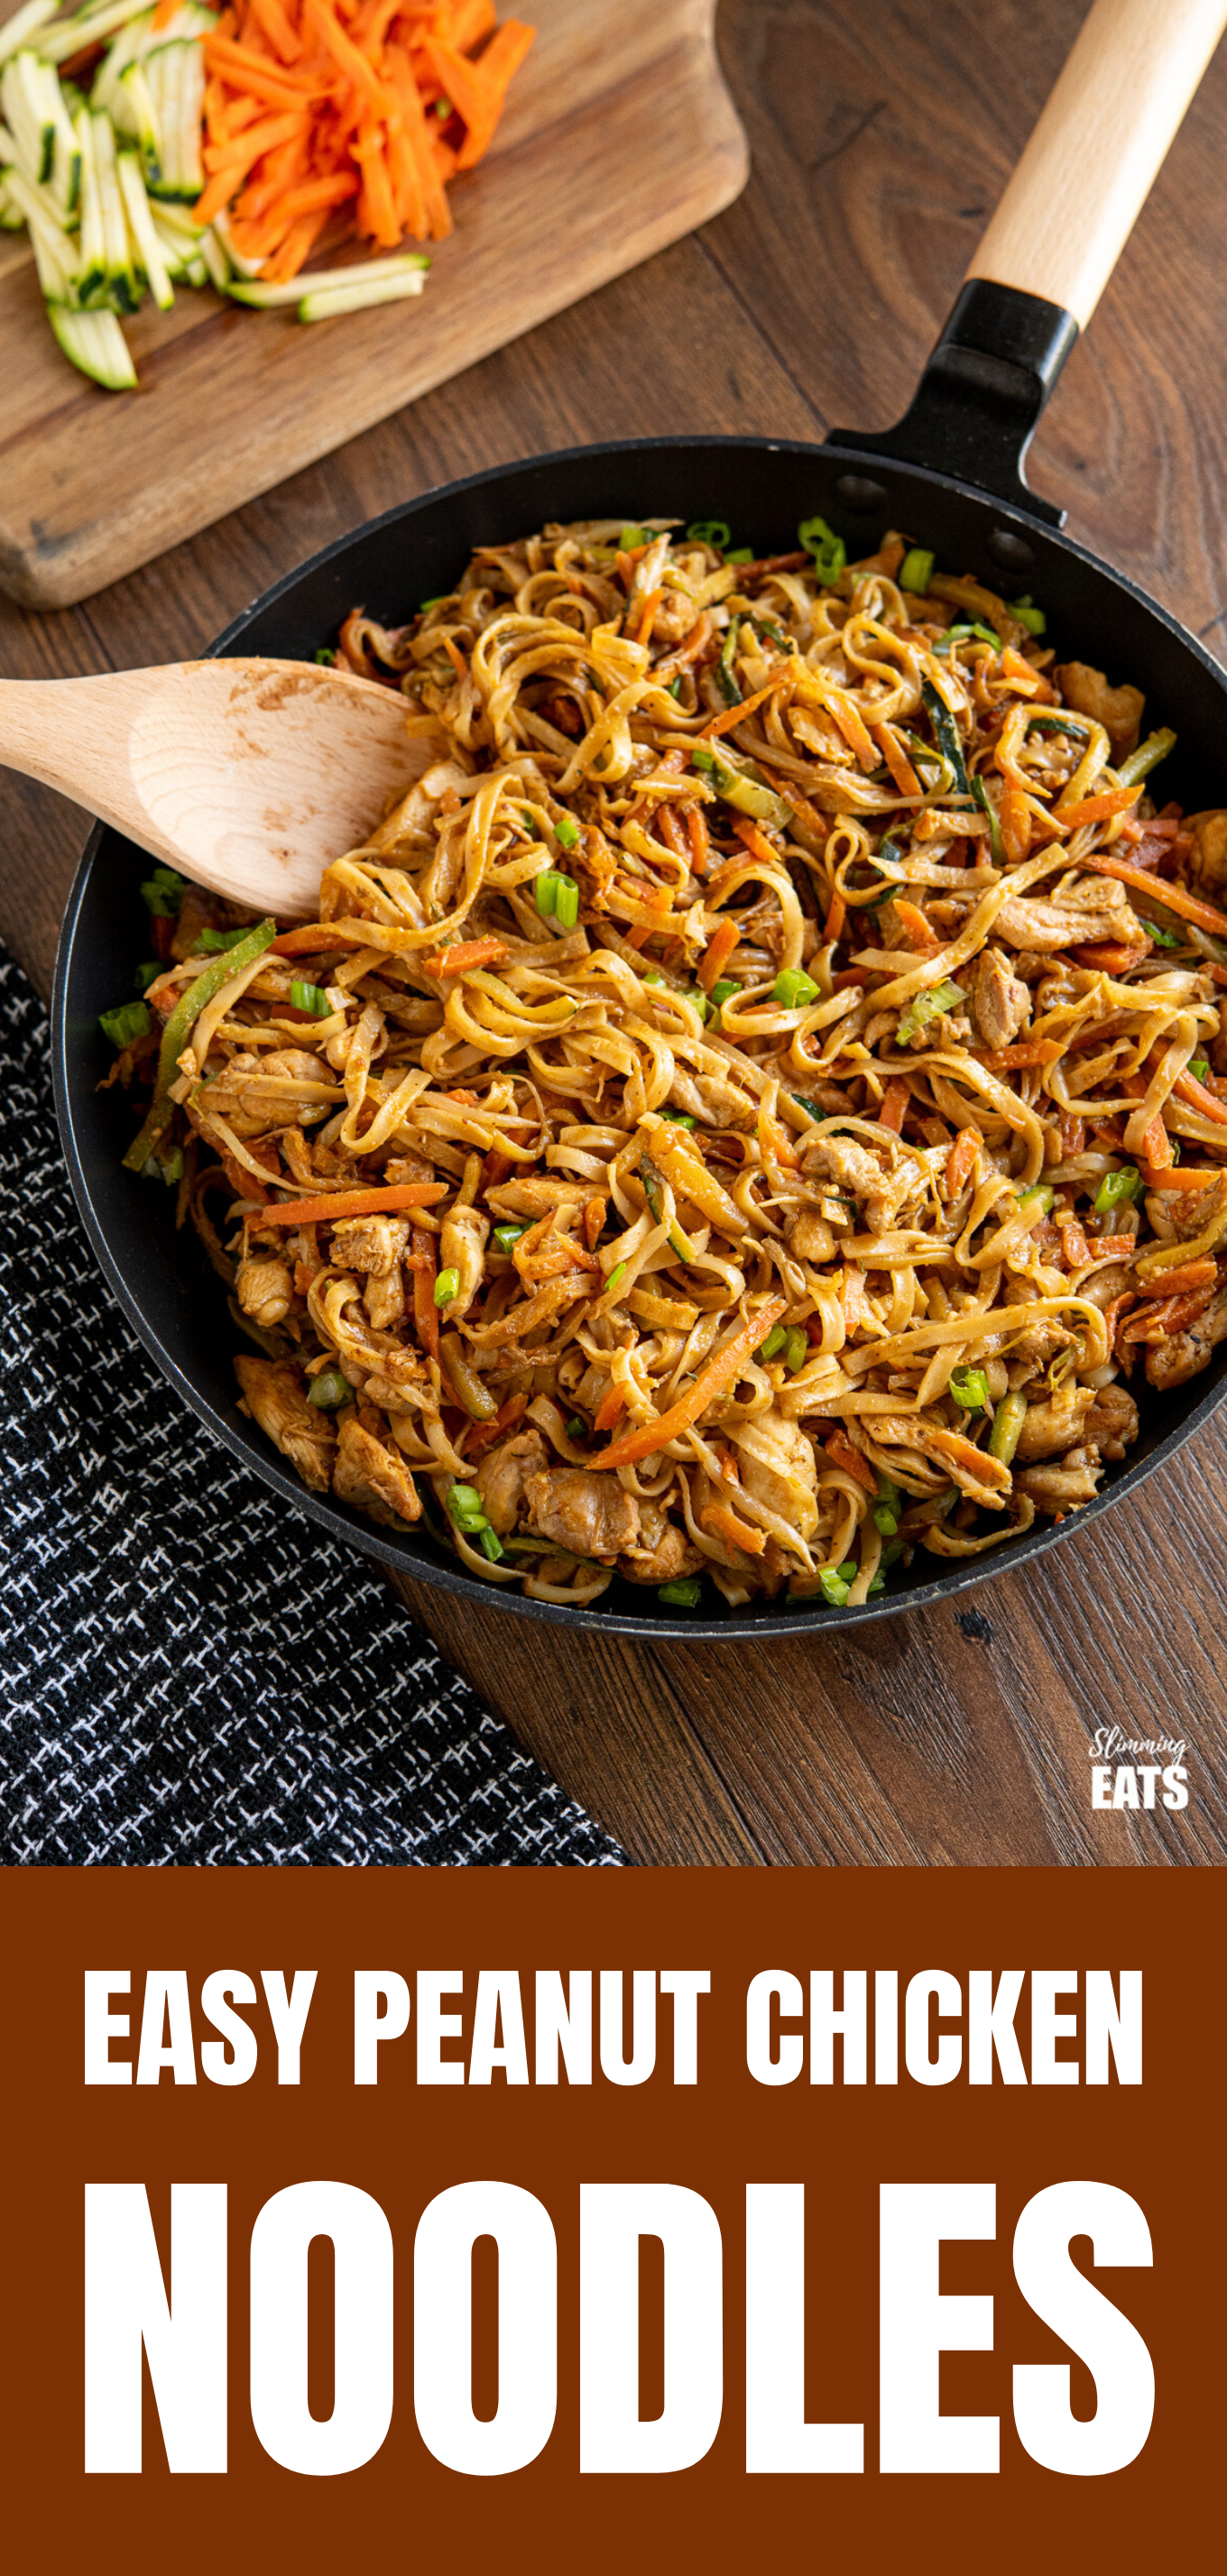 Easy Peanut Chicken Noodles featured pin